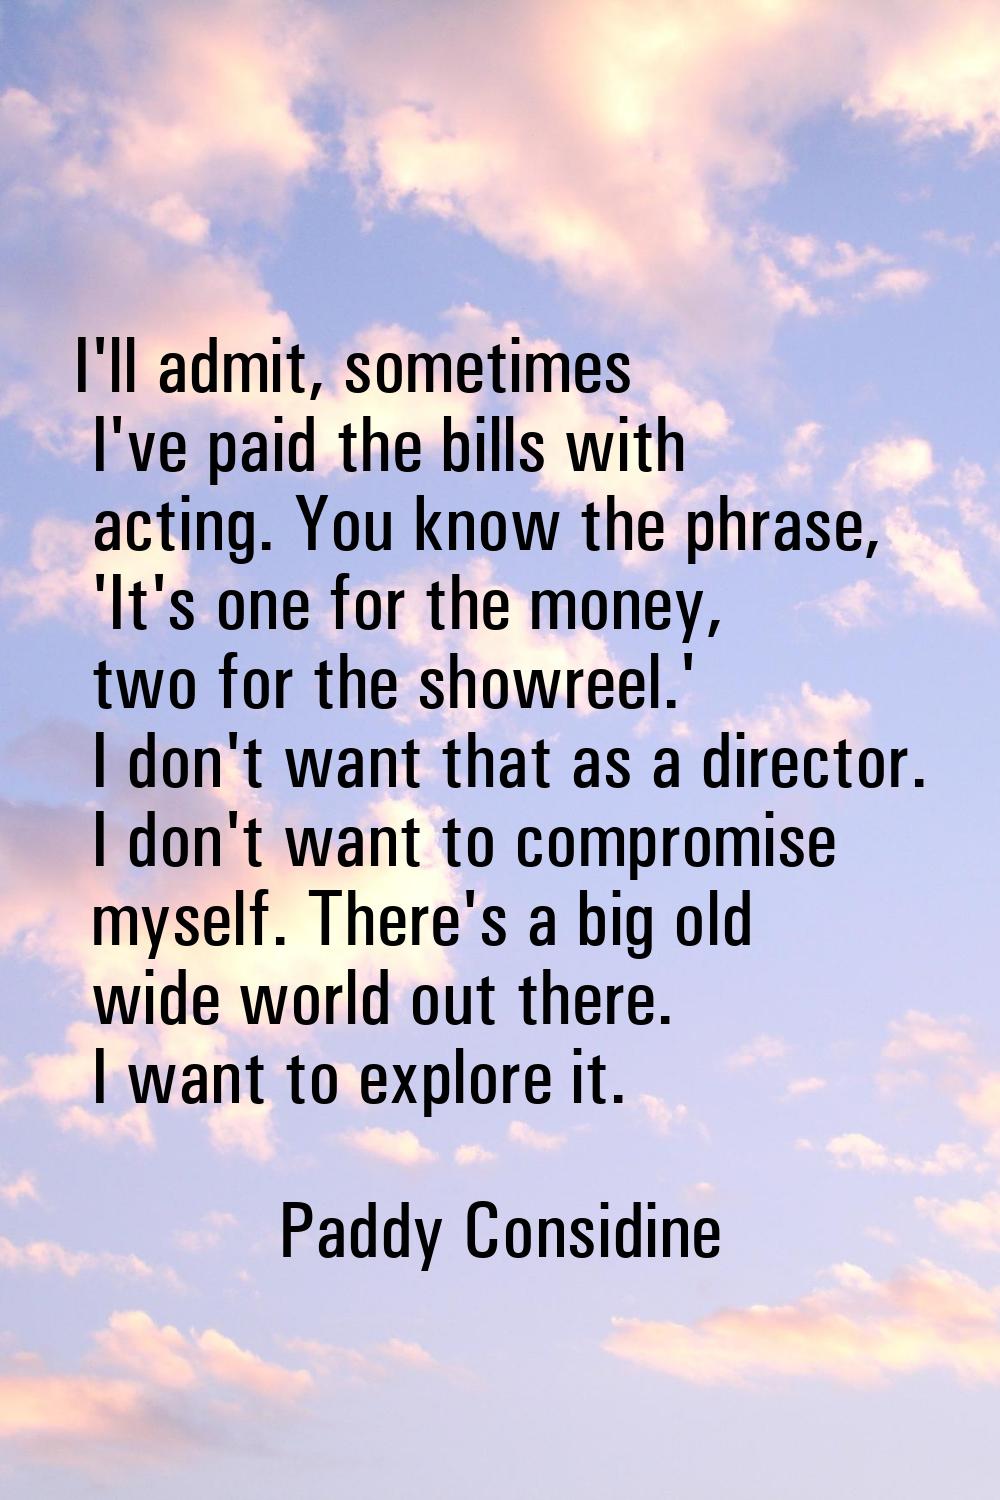 I'll admit, sometimes I've paid the bills with acting. You know the phrase, 'It's one for the money